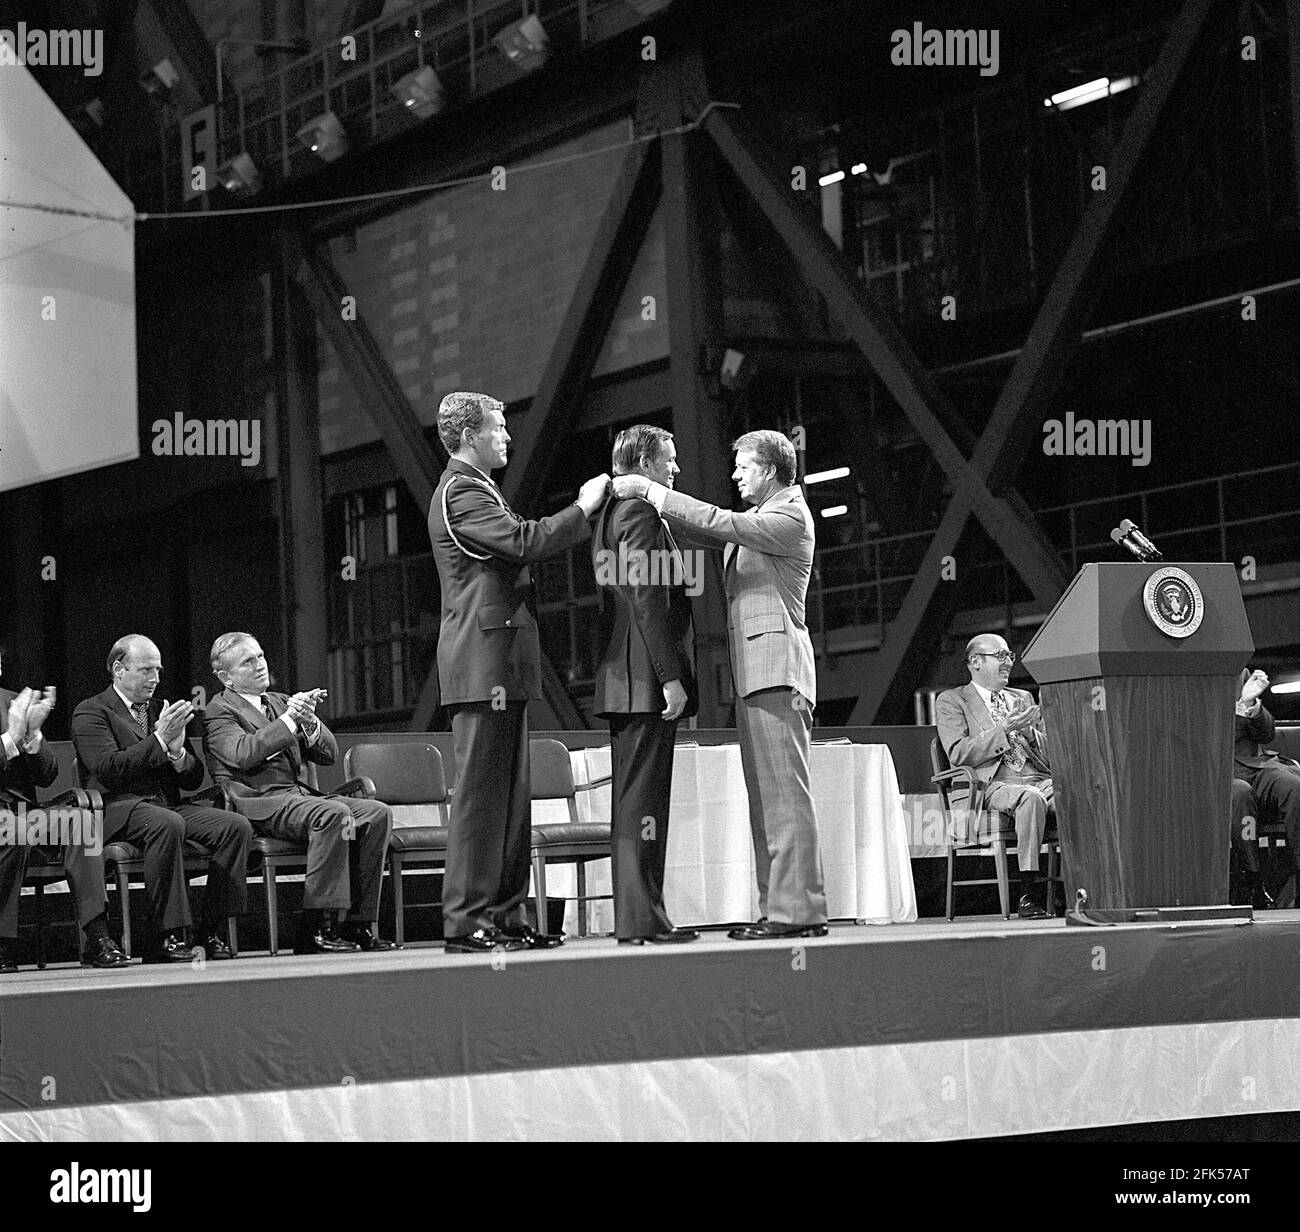 File photo - Cape Canaveral, FL - -- Astronaut Neil A. Armstrong receives the first Congressional Space Medal of Honor from United States President Jimmy Carter, assisted by Captain Robert Peterson on October 1, 1978. Armstrong, one of six astronauts to be presented the medal during ceremonies held in the Vehicle Assembly Building (VAB), was awarded for his performance during the Gemini 8 mission and the Apollo 11 mission when he became the first human to set foot upon the Moon.. --- American astronaut Michael Collins, who flew the Apollo 11 command module while his crewmates became the first Stock Photo